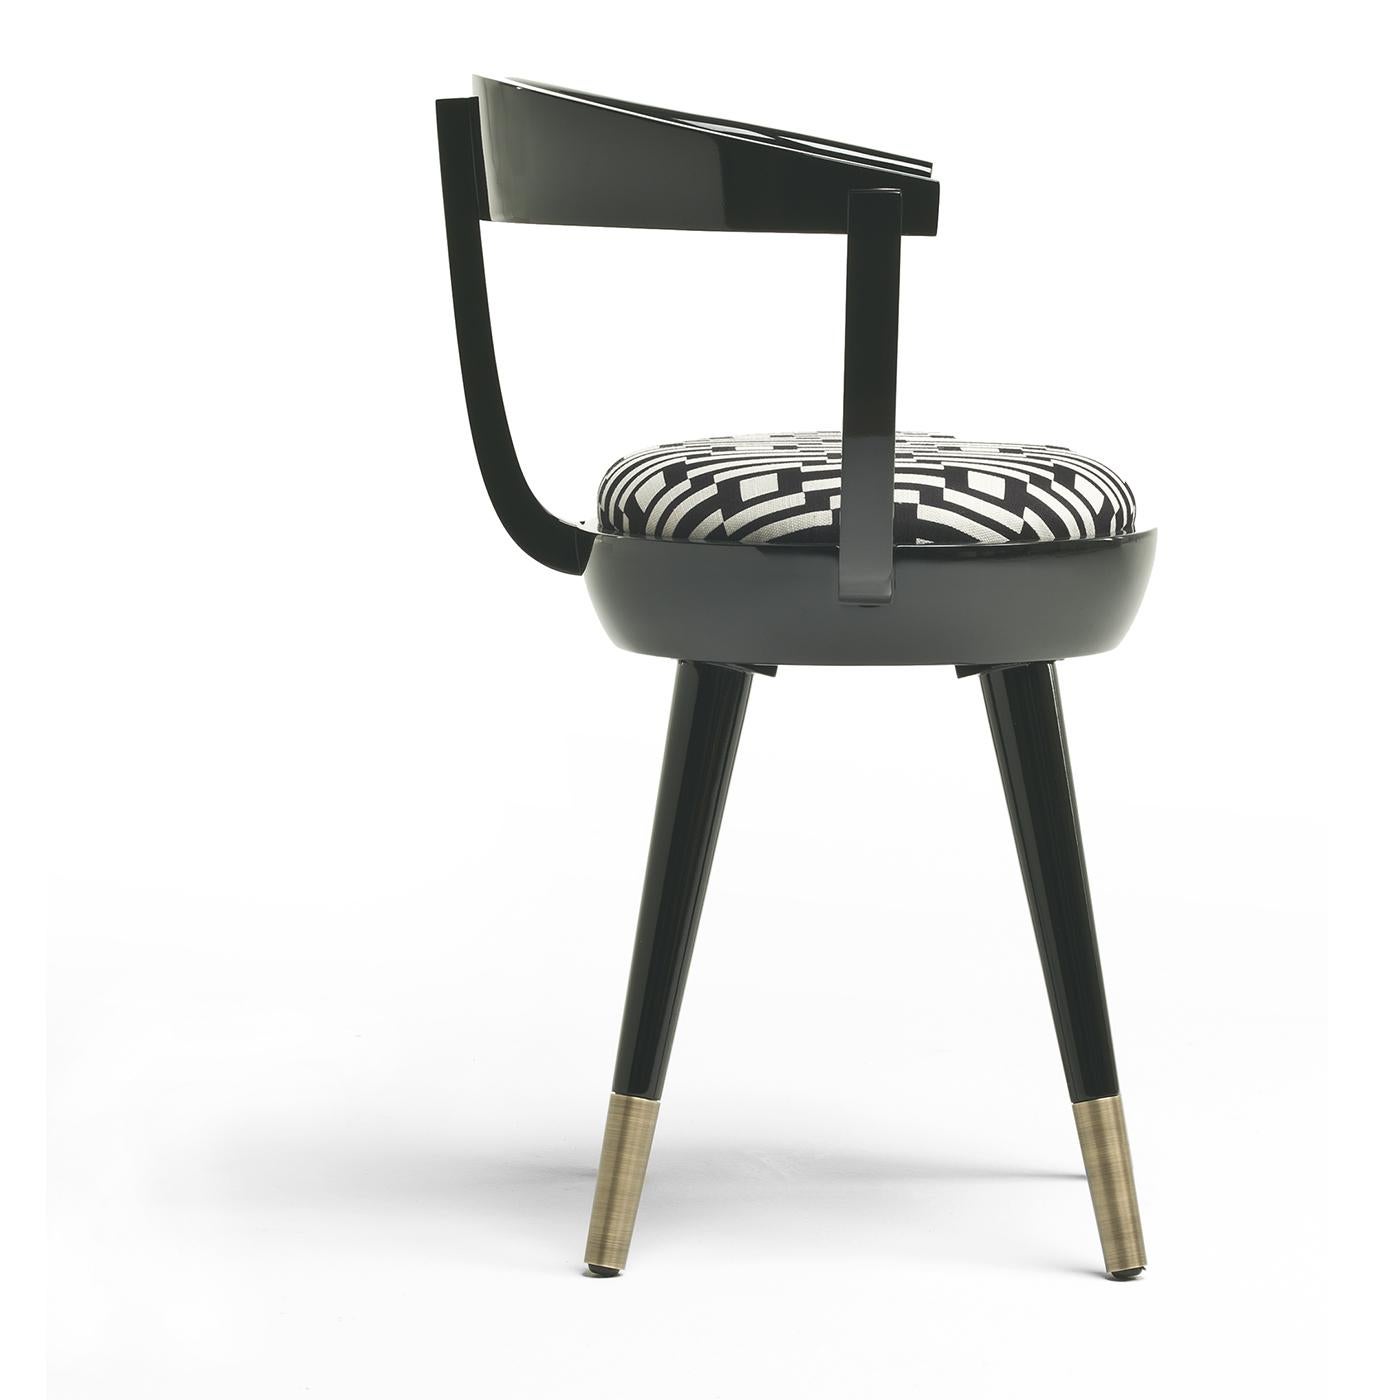 A fun and original design guaranteed to start a conversation, the Galleon Chair sits on flared midcentury modern-inspired legs with burnished brass feet. The chair with a unique backrest is then coated in a glossy black finish and upholstered with